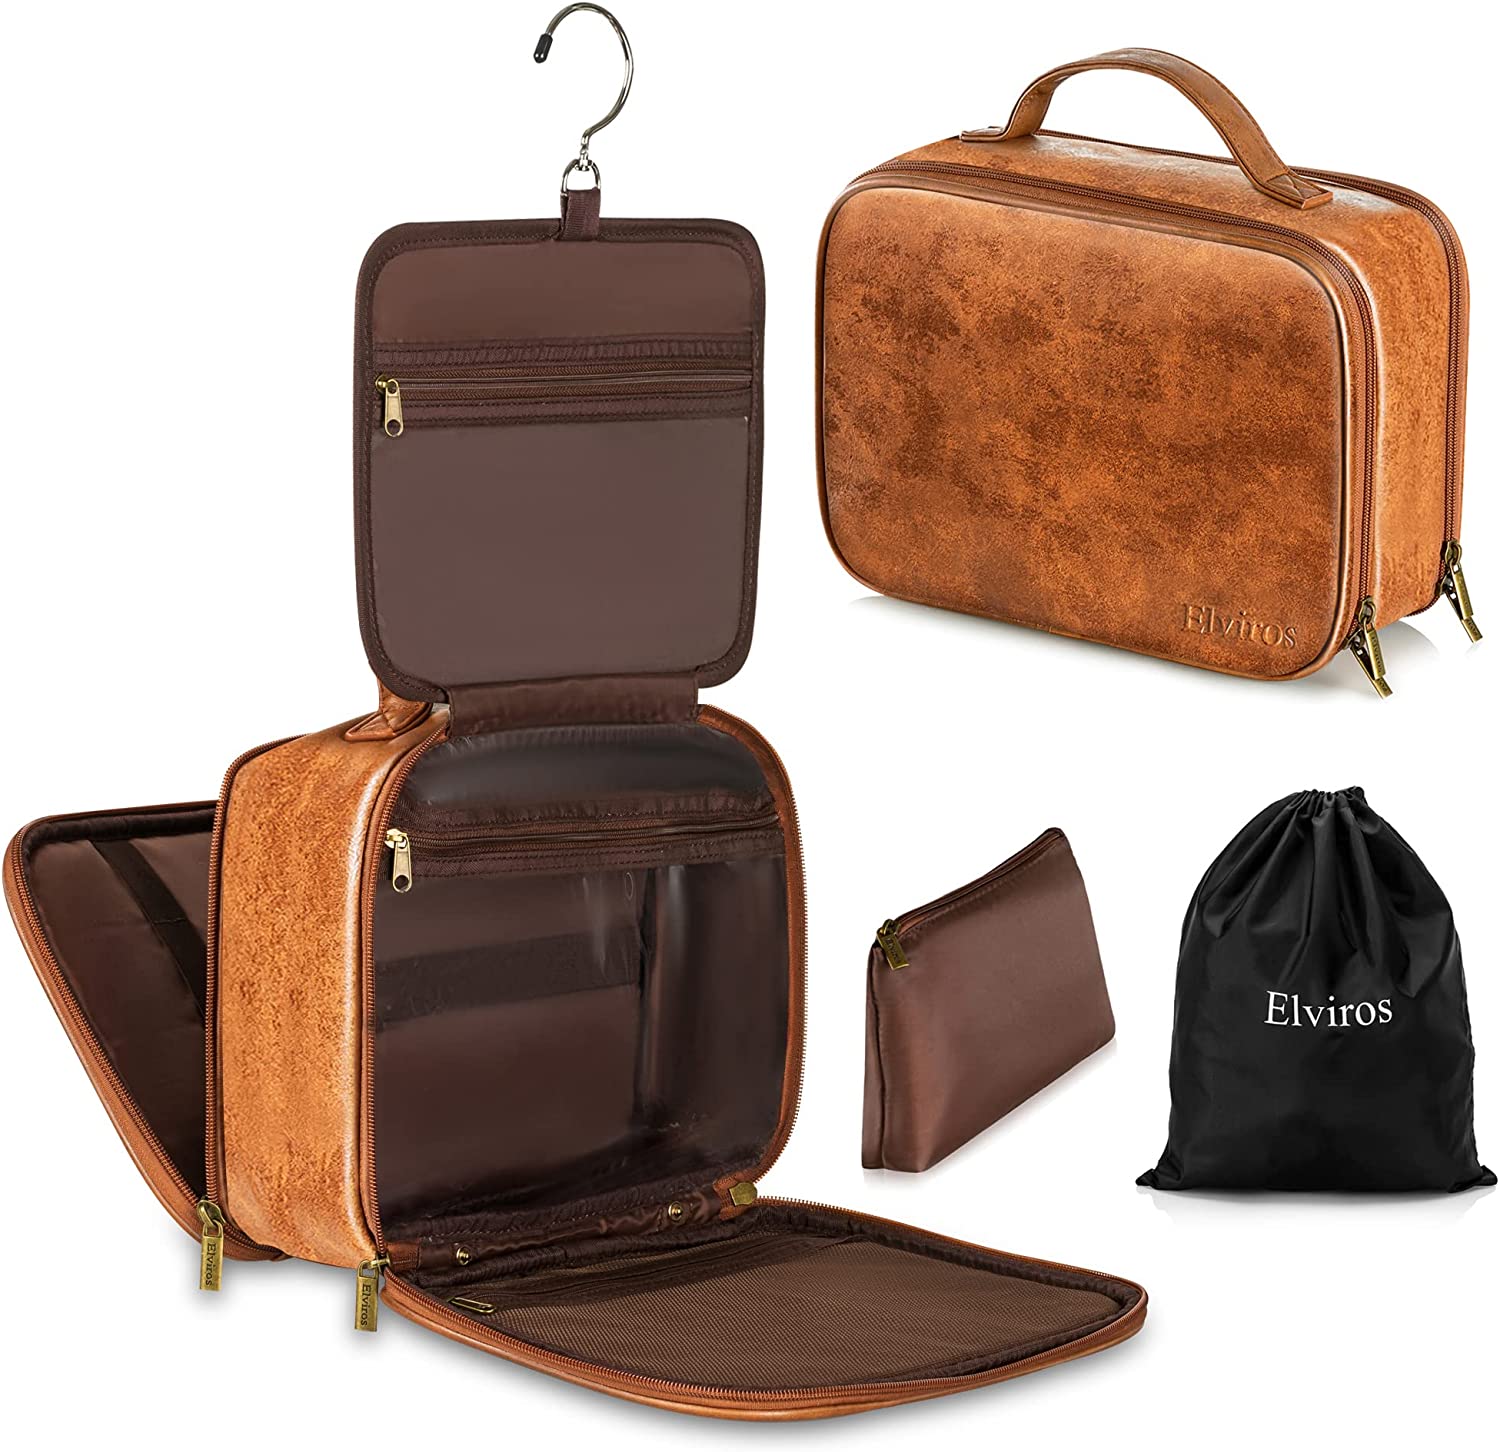 Vetell Leo Large Leather Travel Toiletry Case and Shave Bag with 2 Compartments